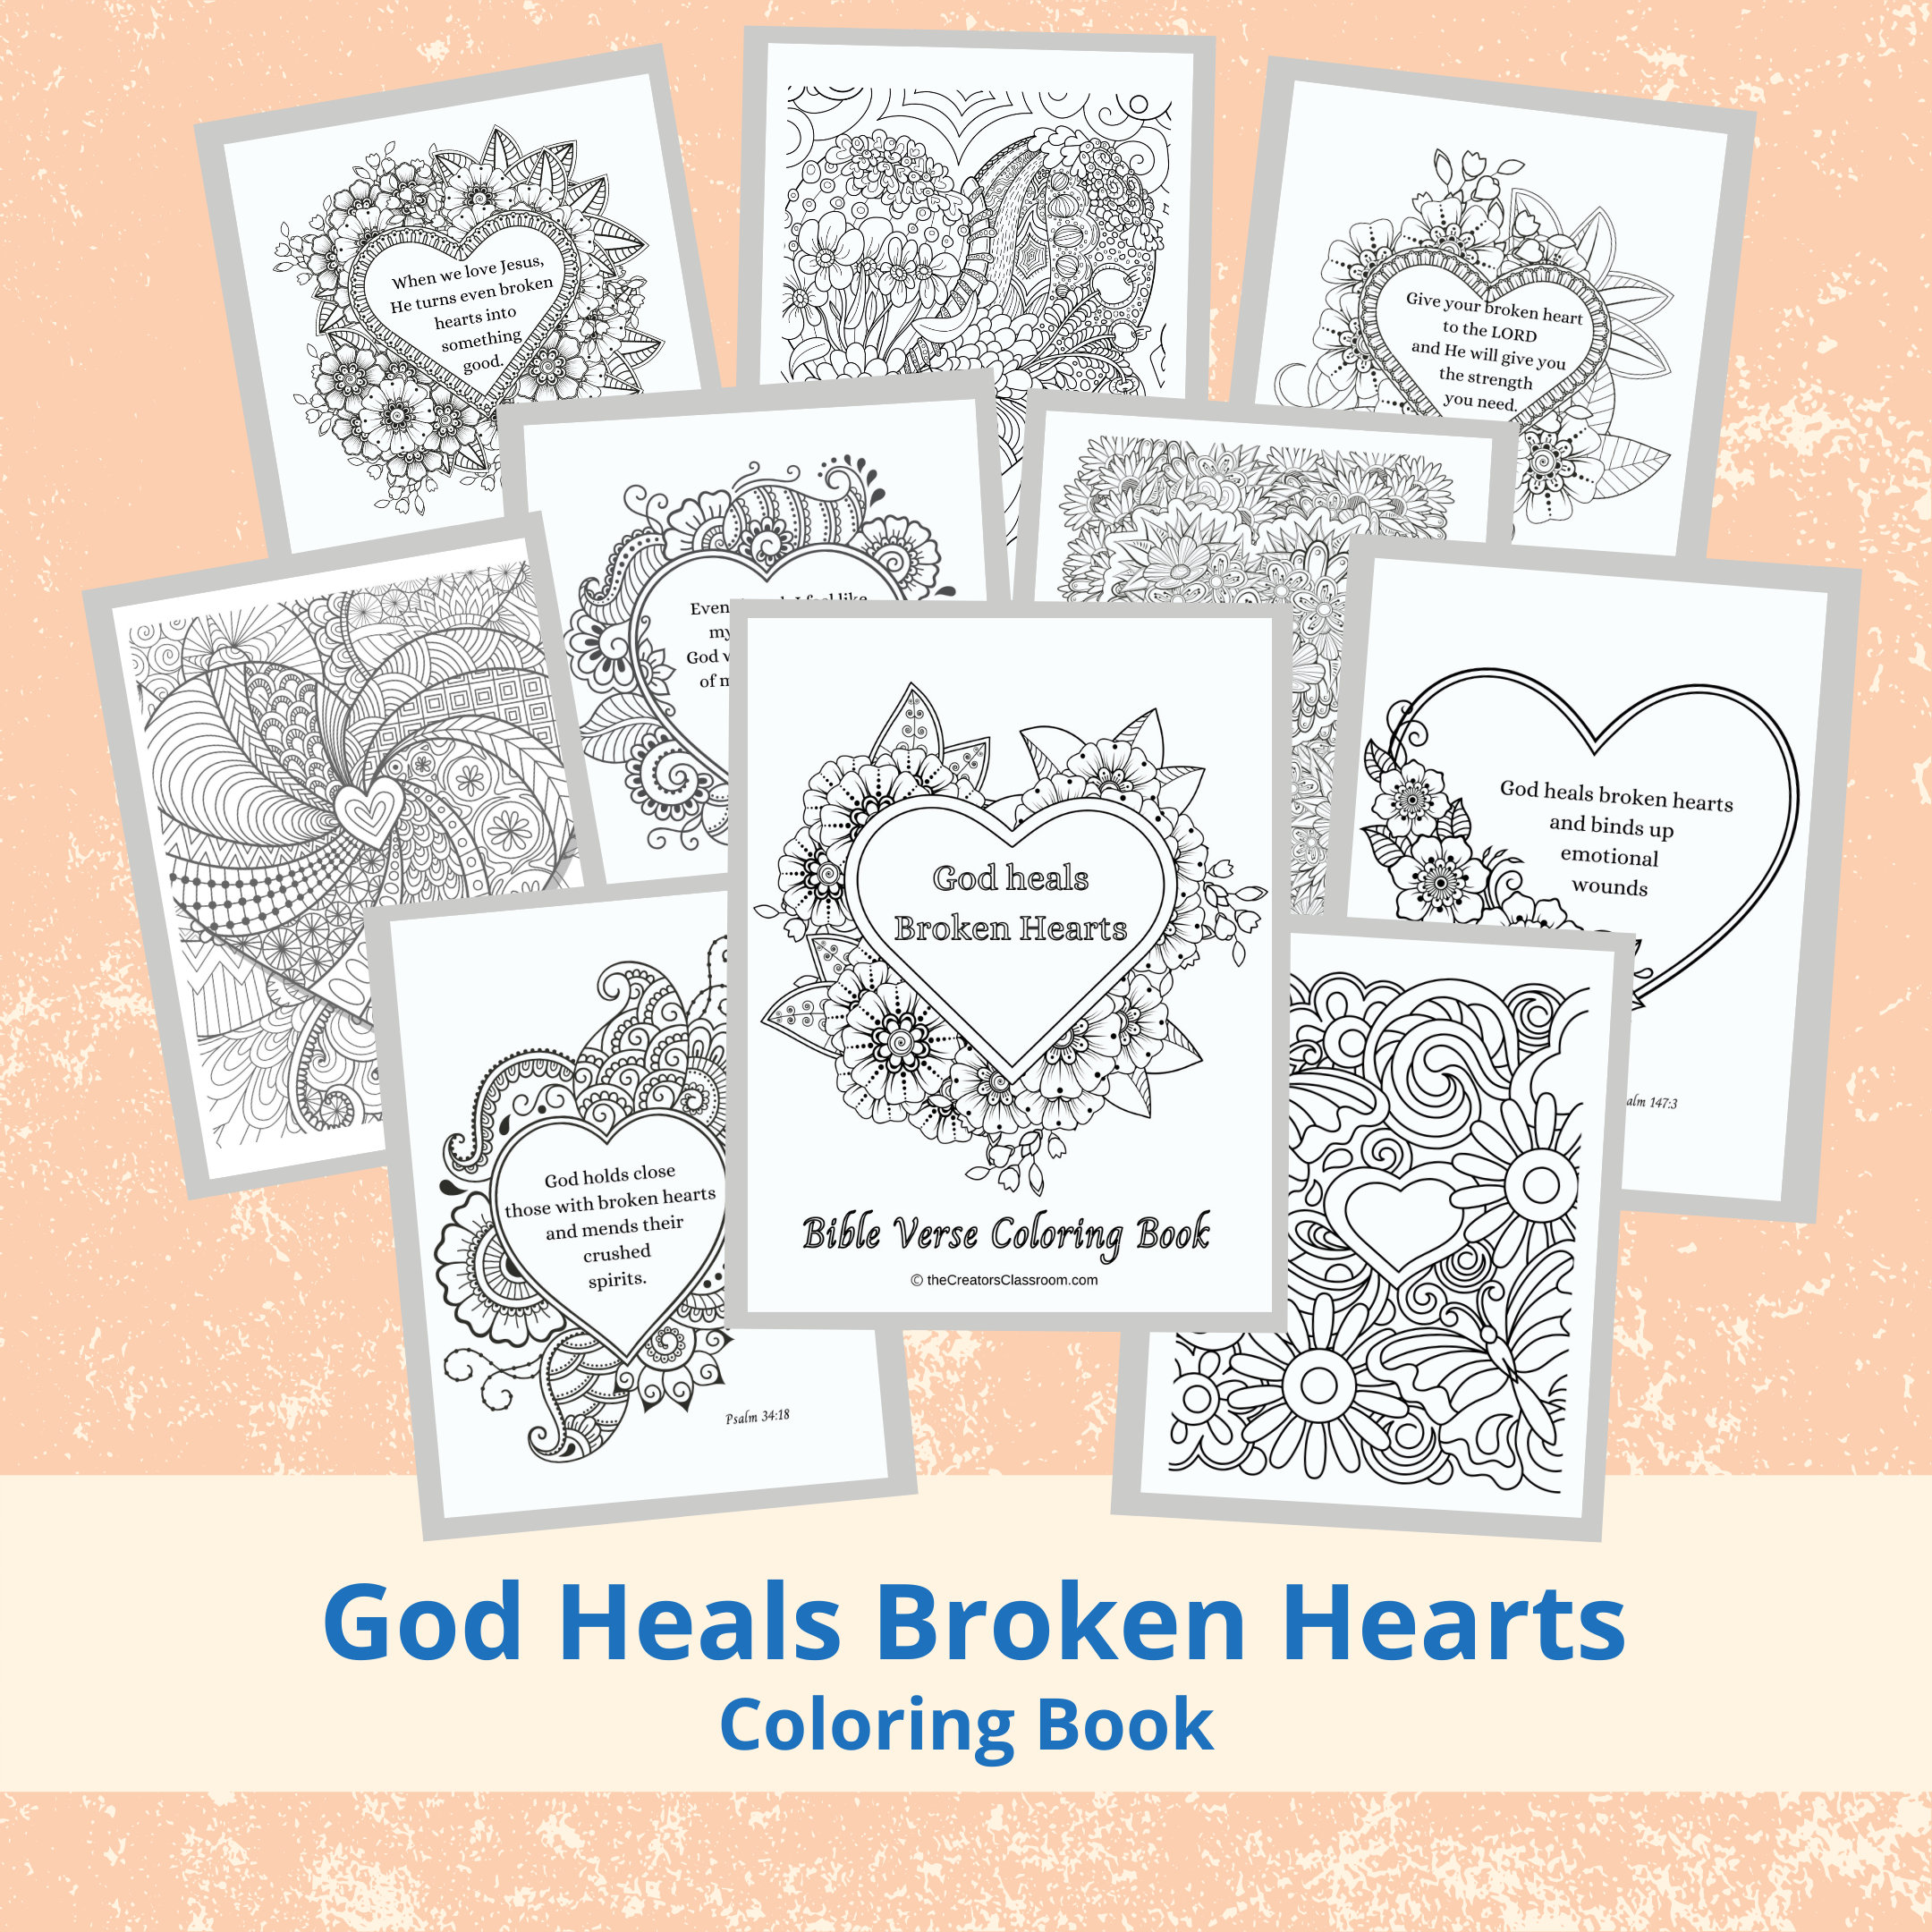 Coloring pages for adults christian coloring pages god heals broken hearts bible verse coloring pages coloring book pdf download now